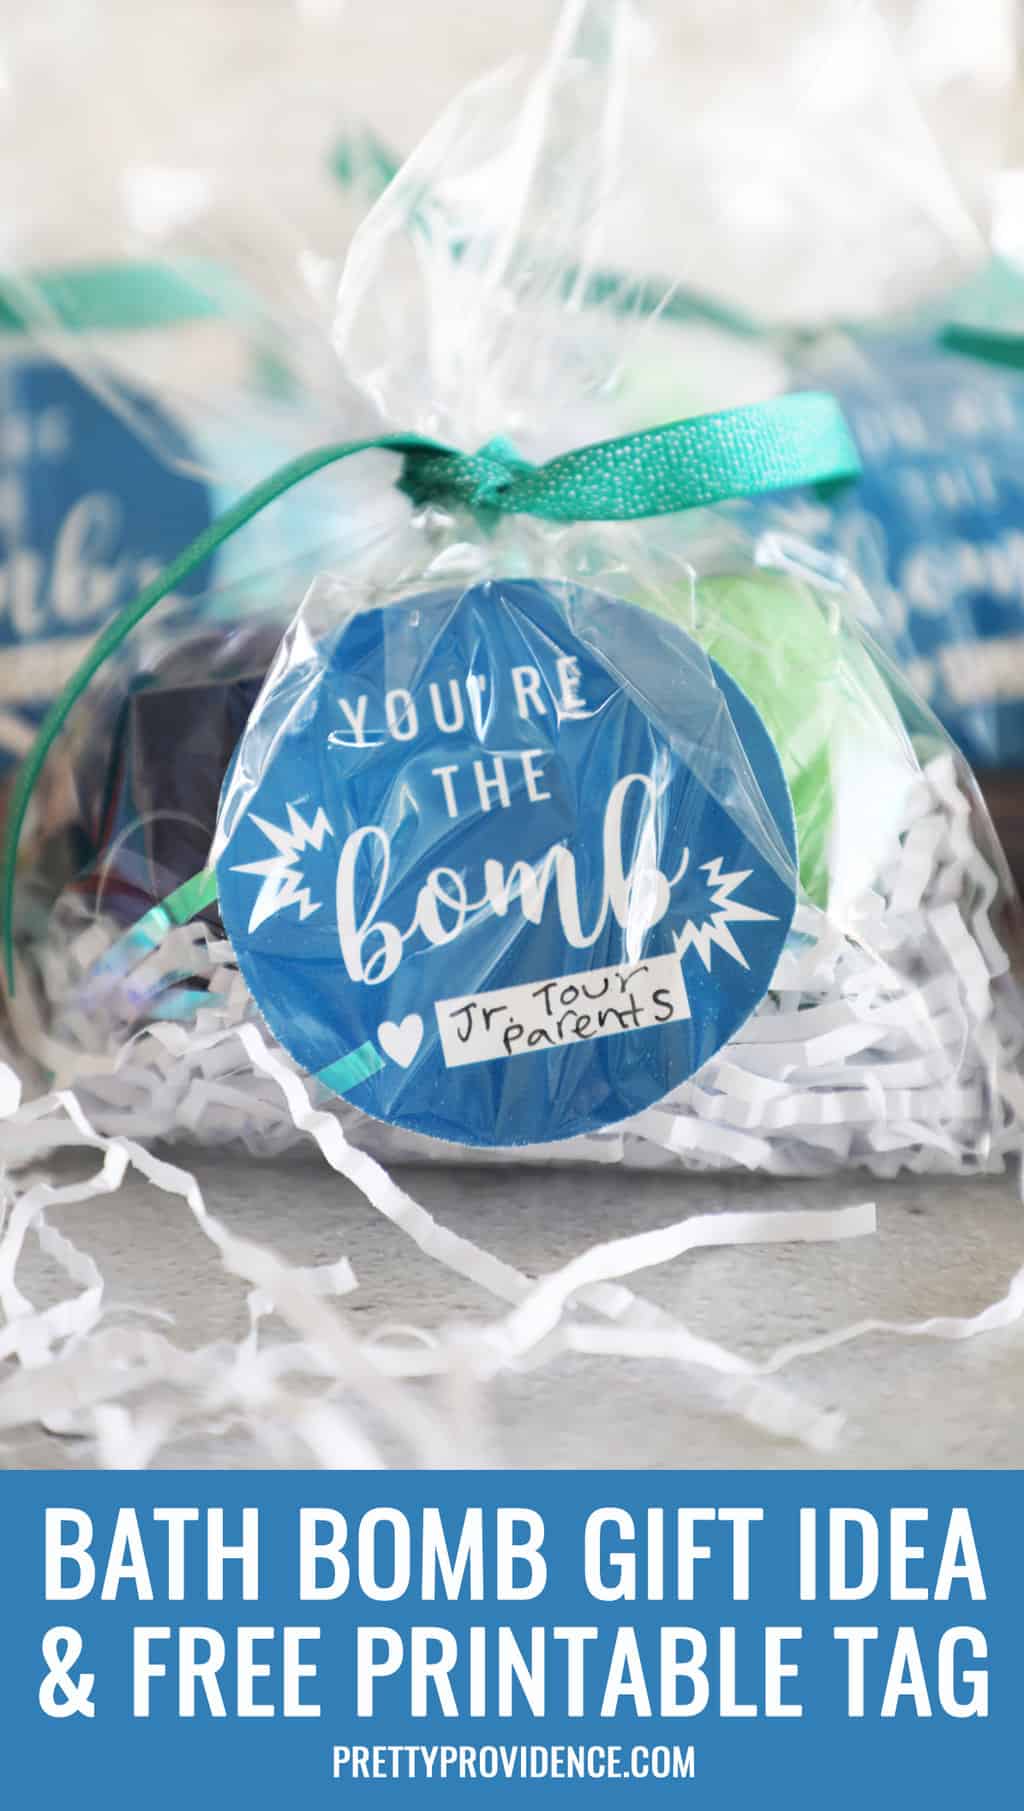 Bath Bomb Gifts with Free Printable Tags